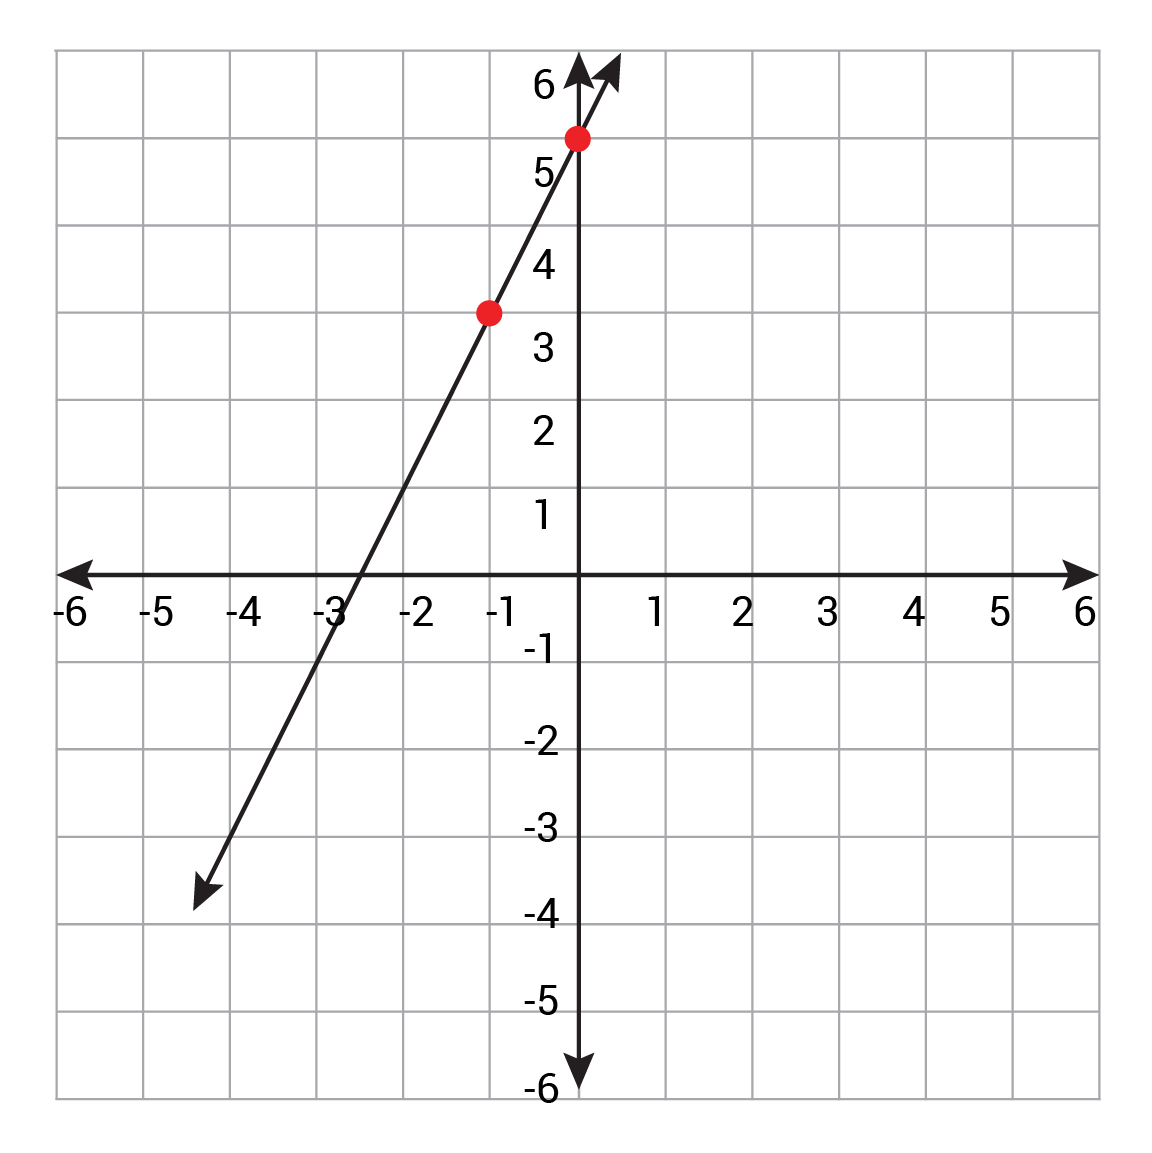 Linear line with points (0,5) and (-1,3)